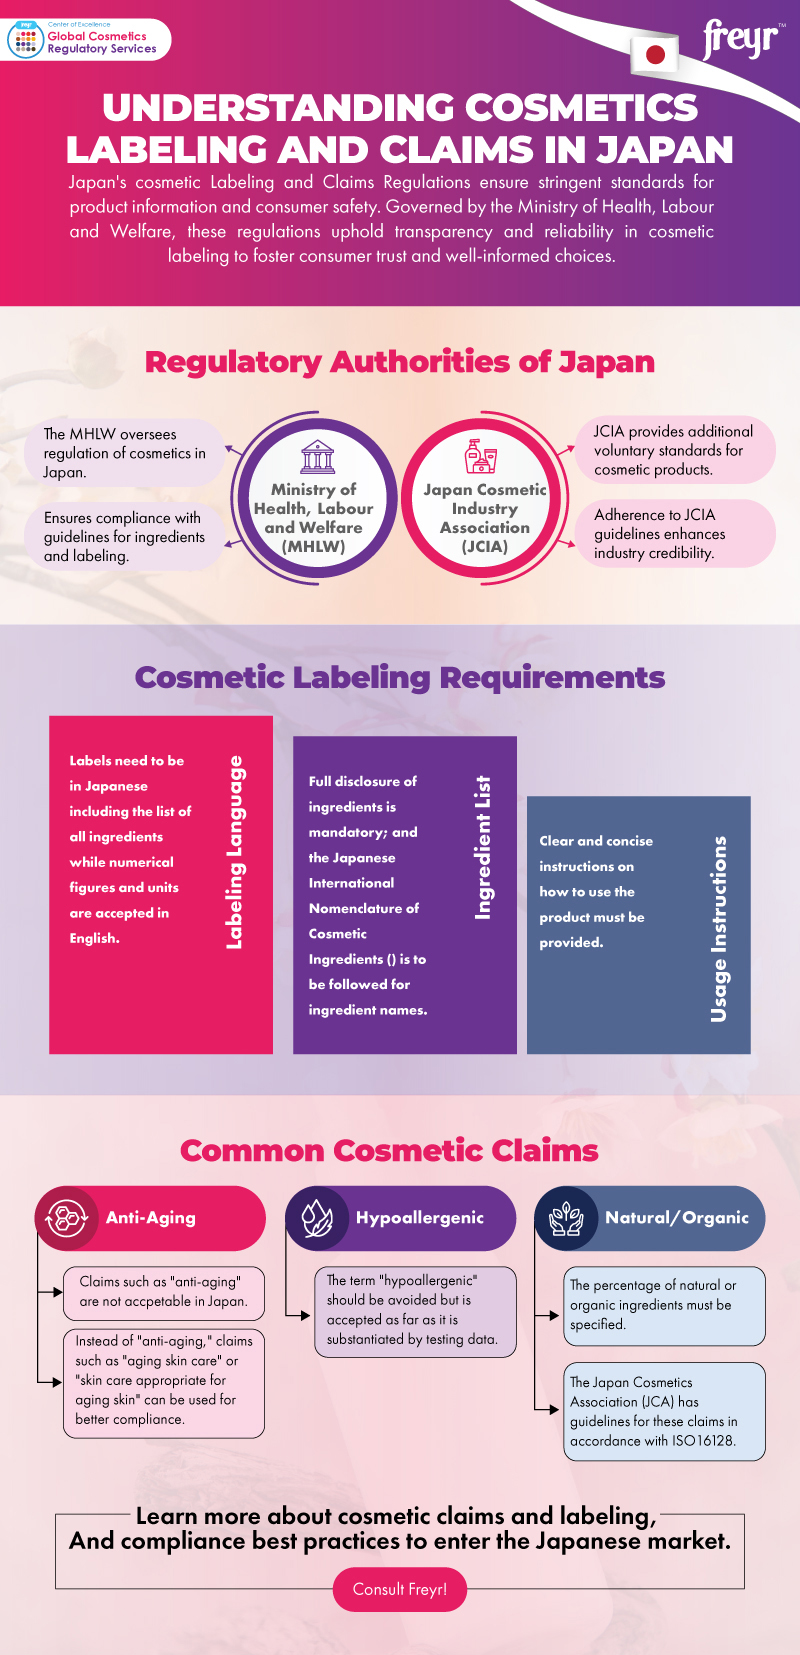 
Understanding Cosmetics Labeling and Claims in Japan
